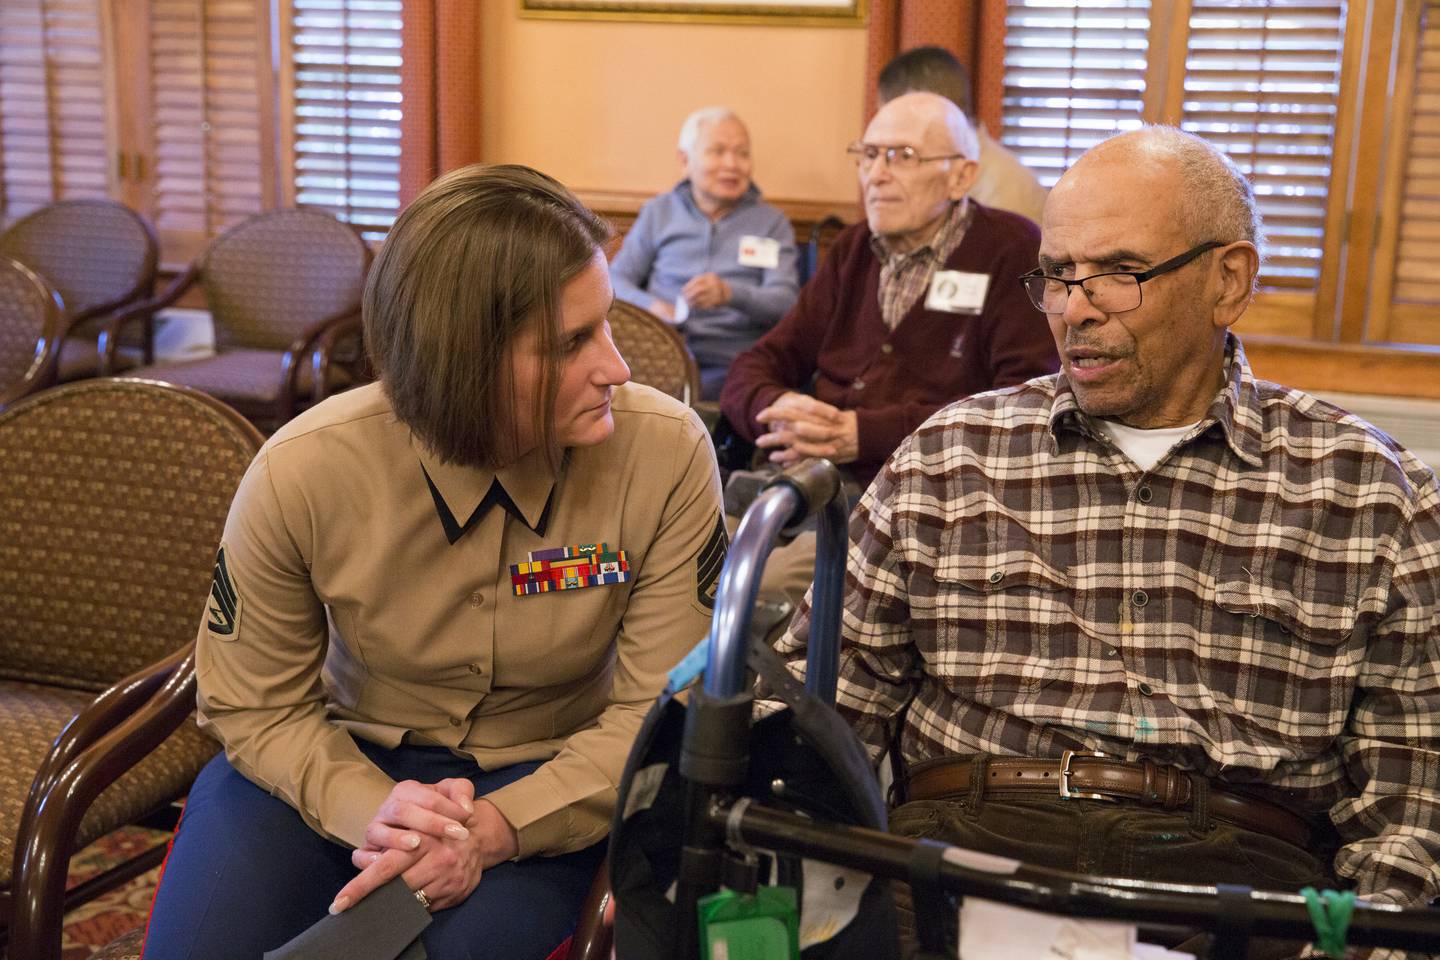 Marine Corps Staff Sgt. Amanda J. Eason, a planner at Marine Corps Base Quantico, speaks with a resident at the Heatherwood Retirement Home during a Veterans Day visit in Burke, Virginia, in 2016.